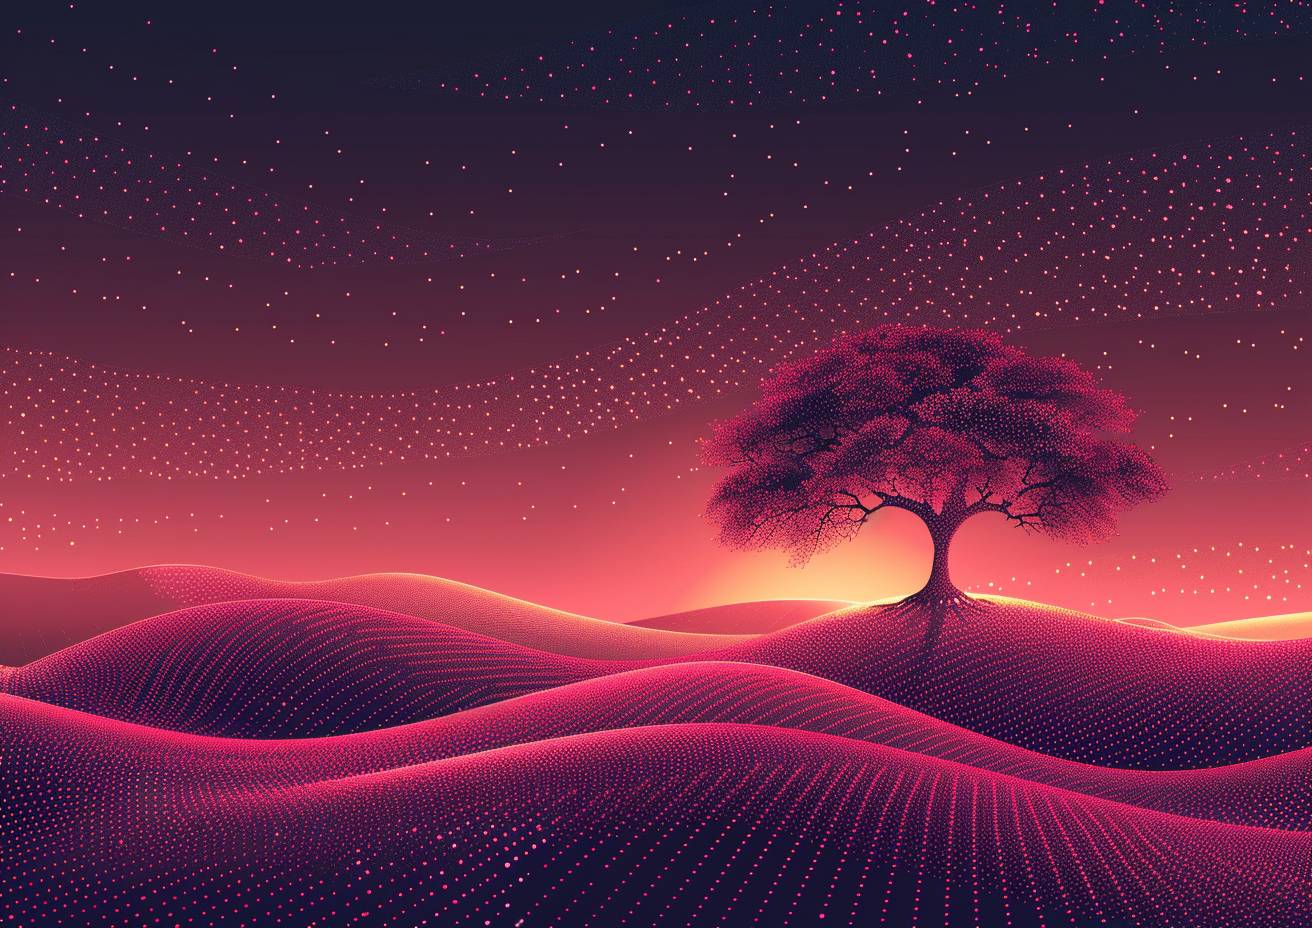 A vector illustration on a blank canvas, using pink and white phosphor dots of different sizes, forming a tree of life, rolling hills, negative space